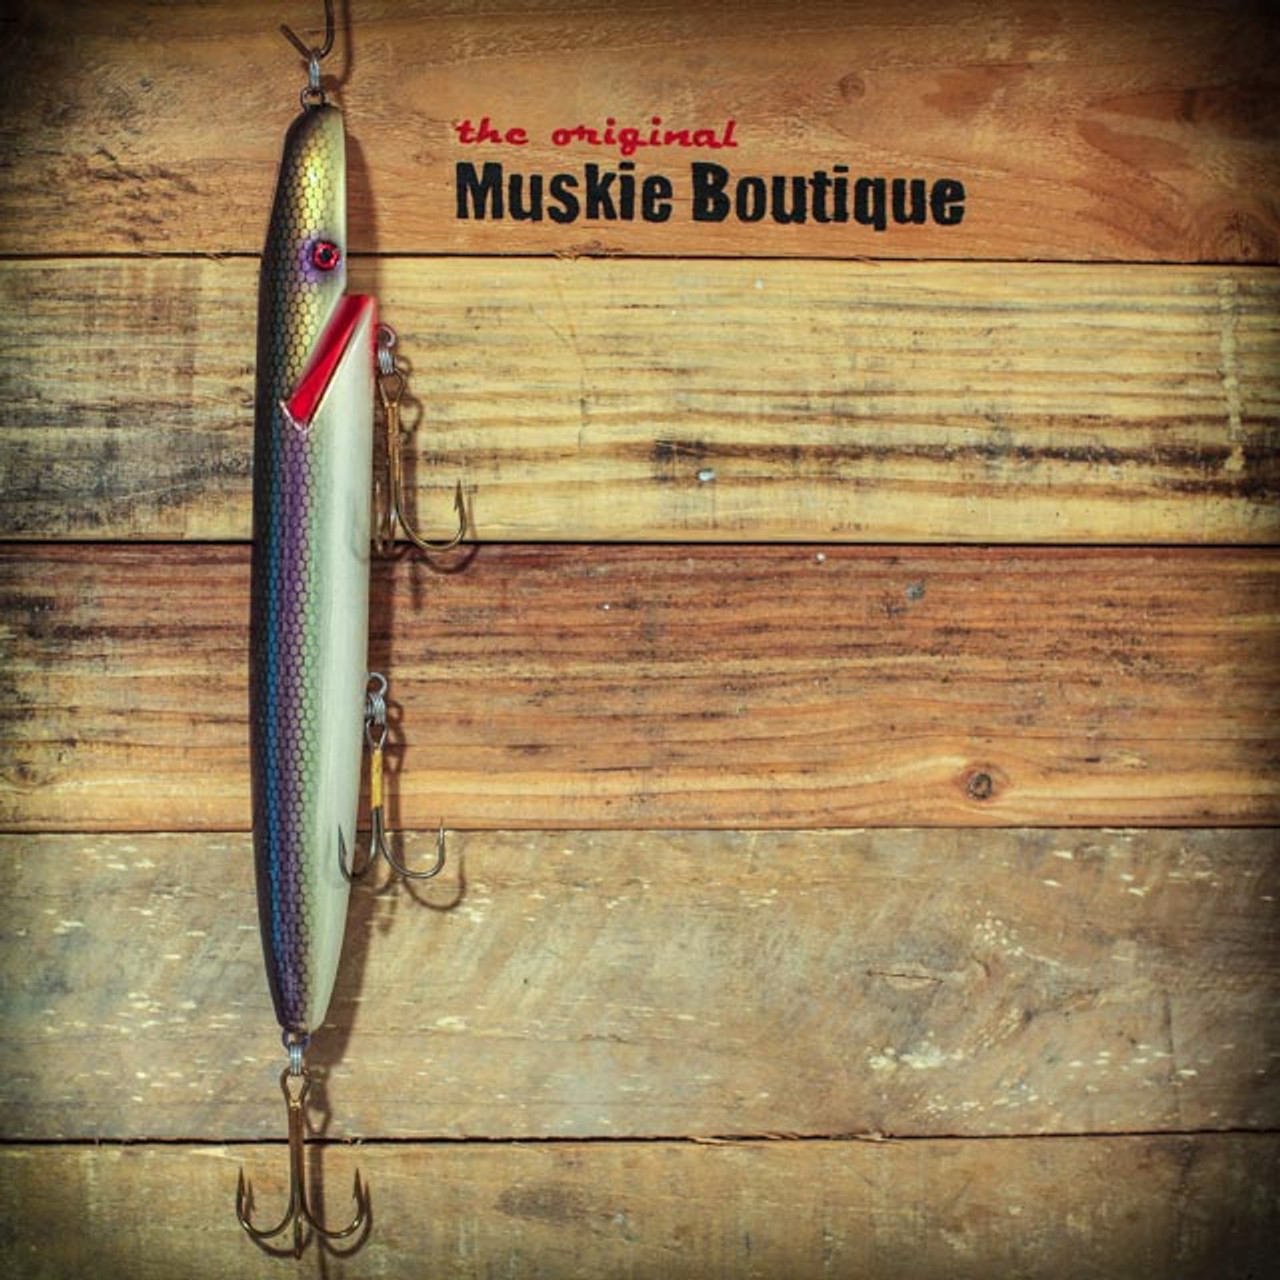 Sledge Hammer - 11 Sledge (Weighted) - Muskie Boutique